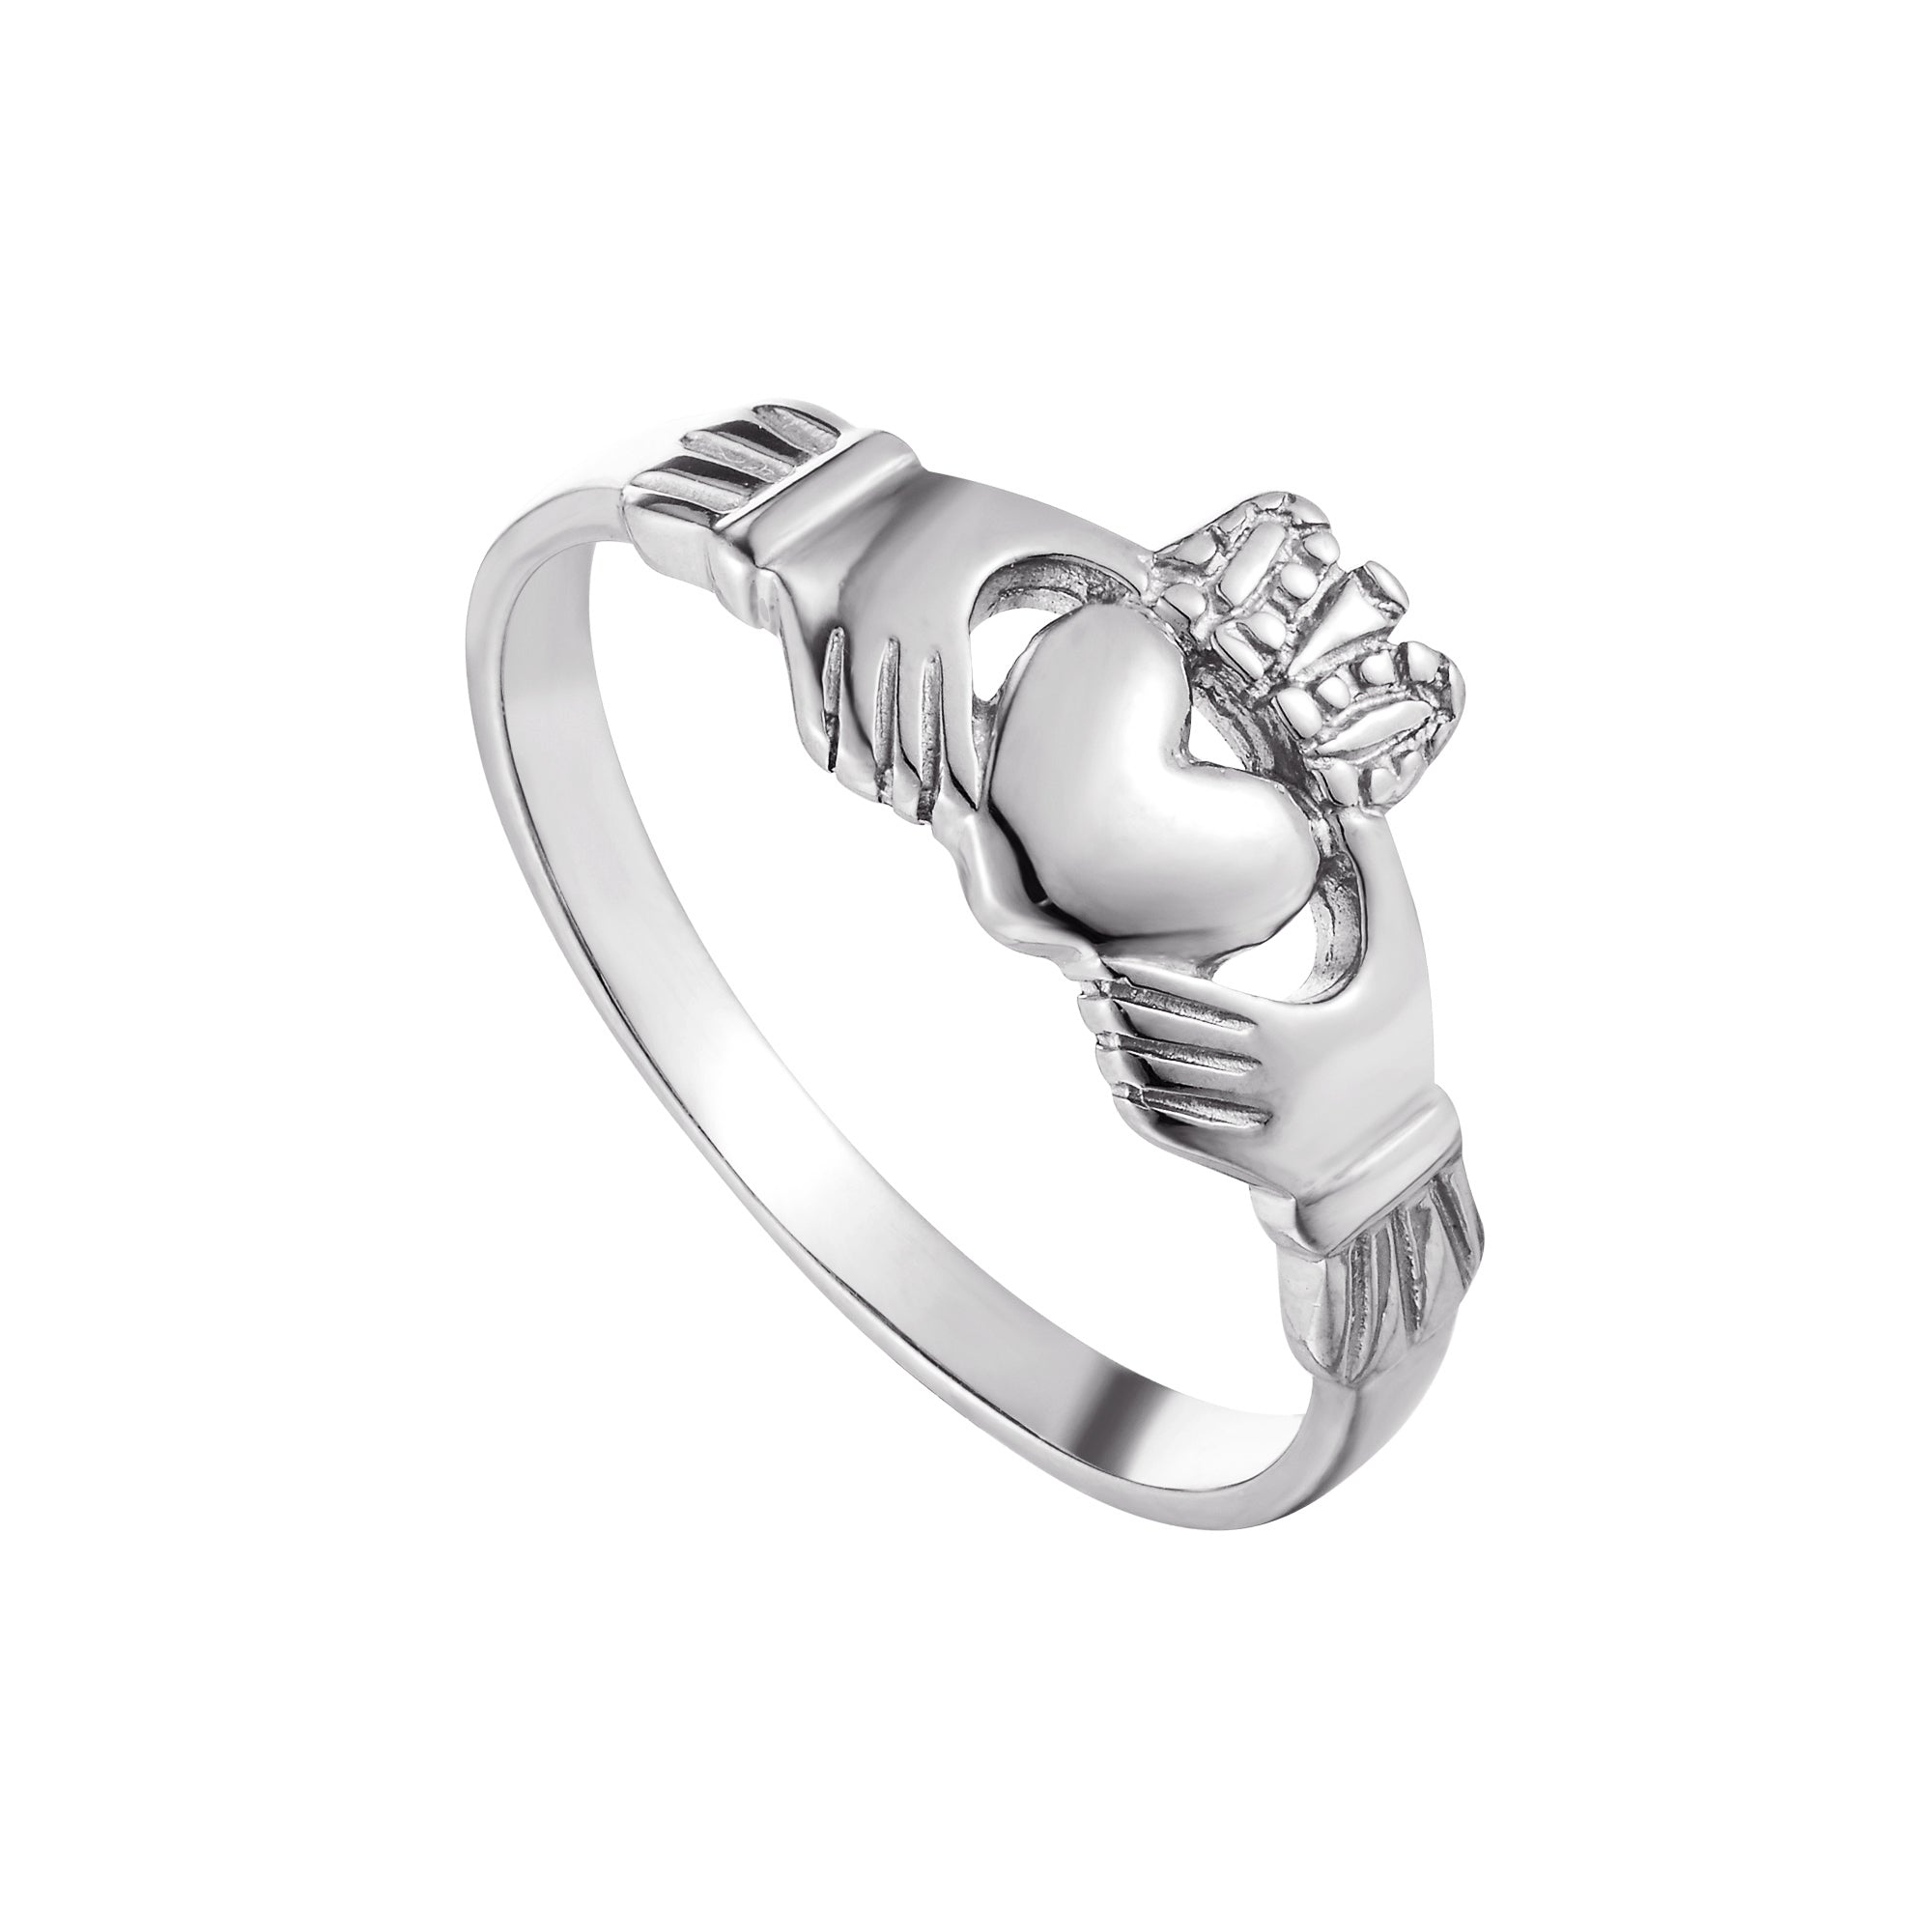 silver claddagh ring - seolgold